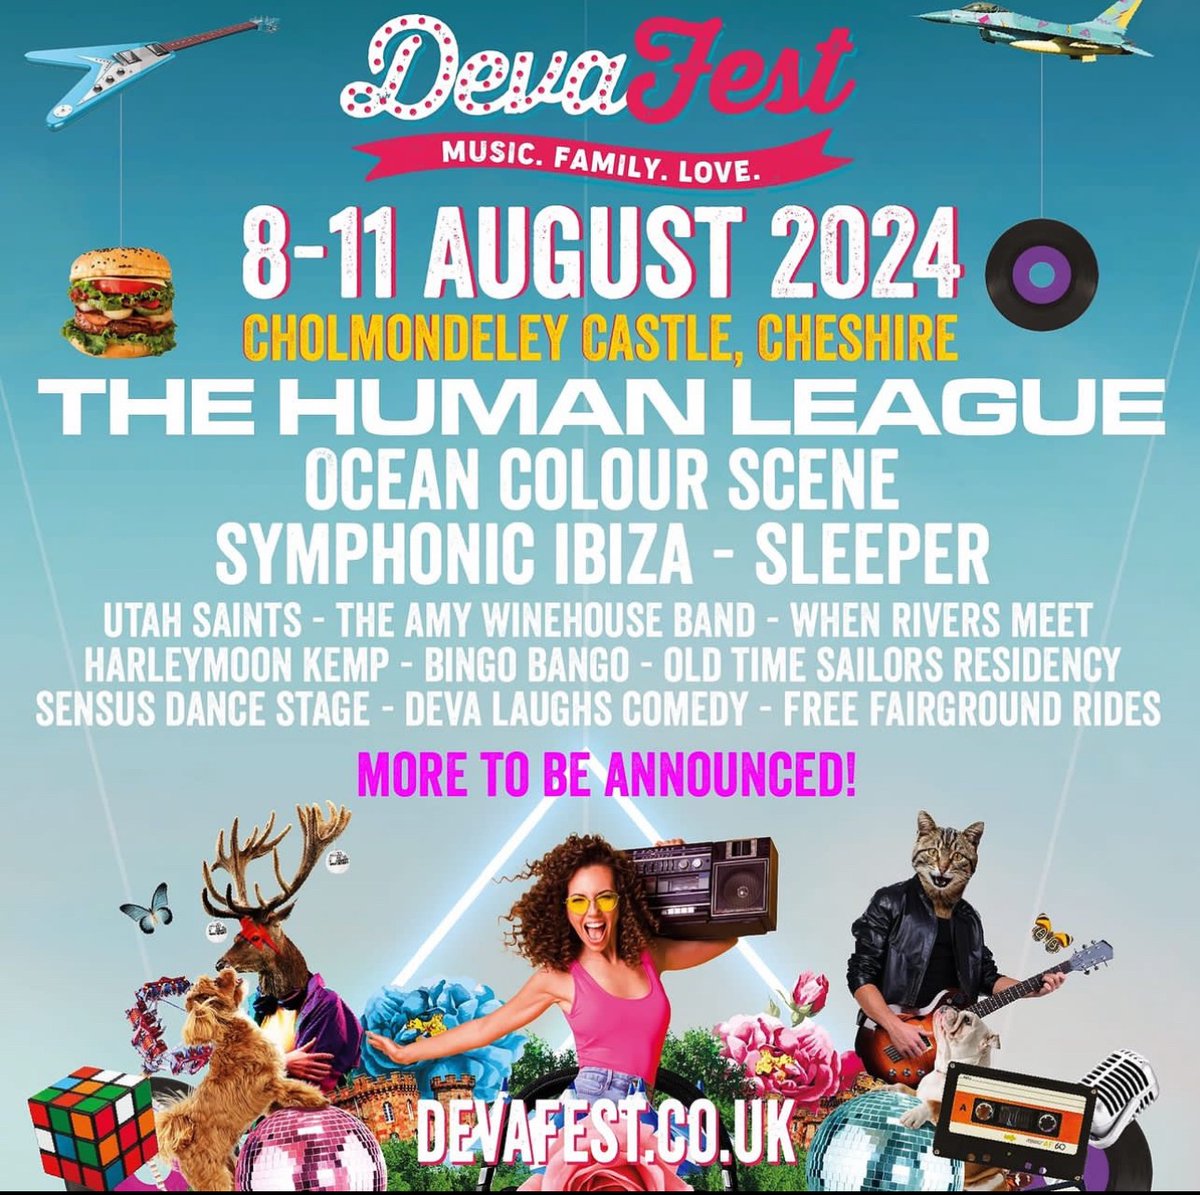 Can’t wait to play 6th July in Cheshire @devafestuk - what a great line up !!! X